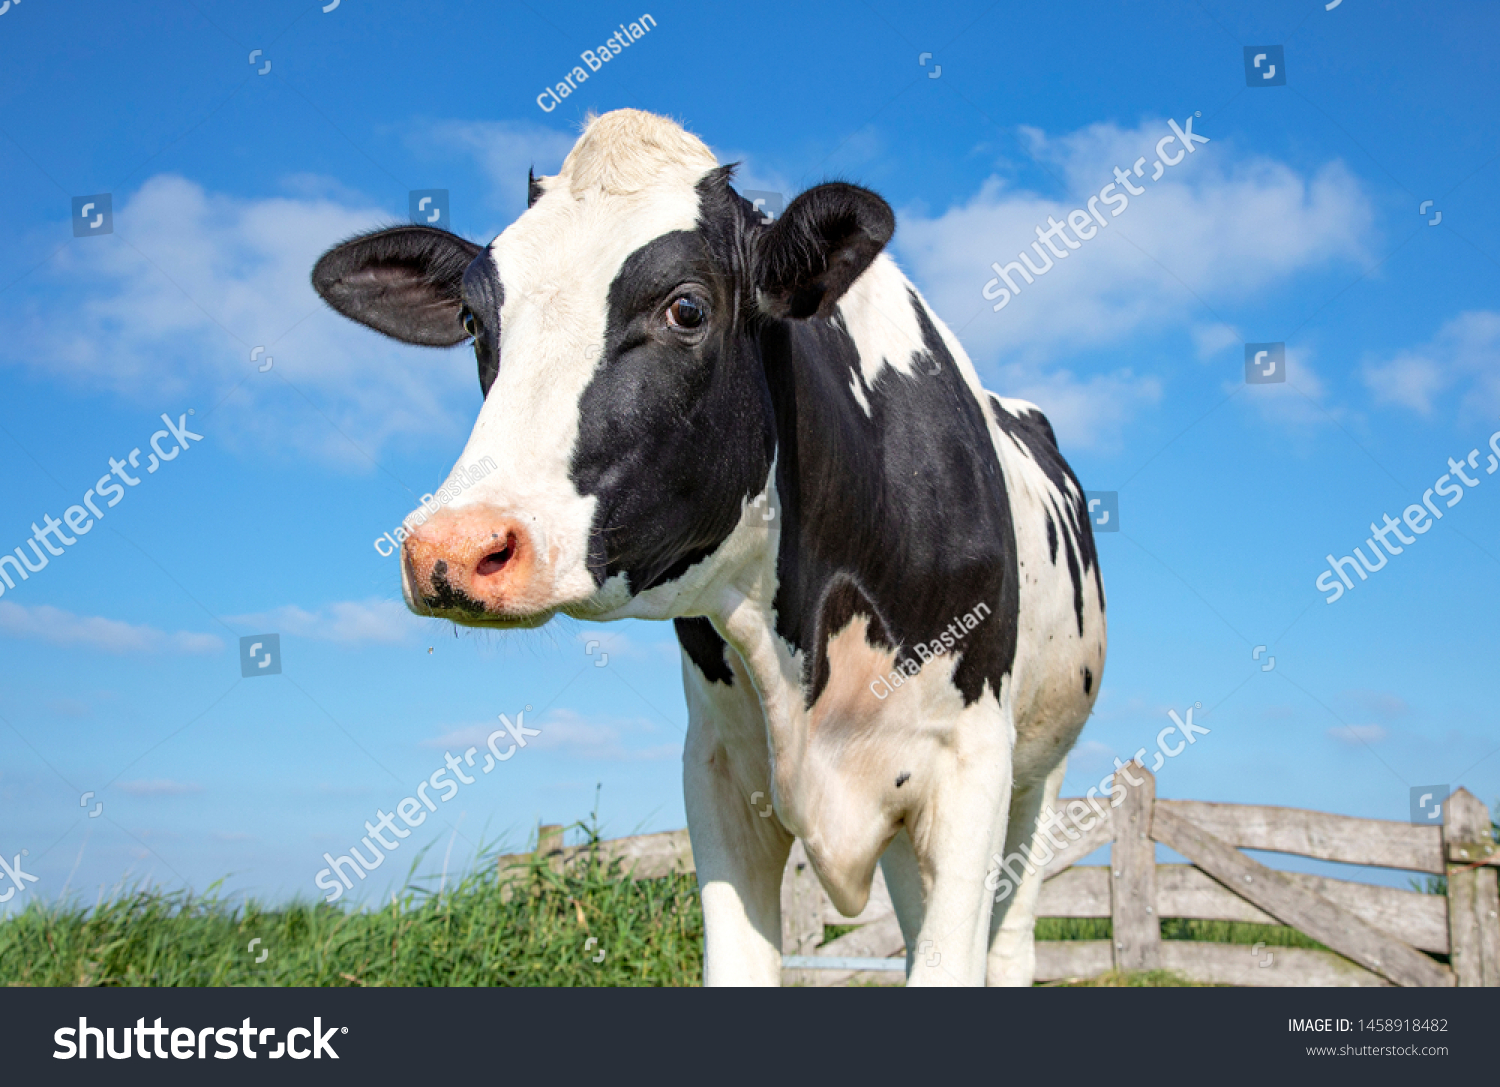 Mature, adult black and white cow, gentle look, pink nose, in front of an old wooden fence and a blue sky. #1458918482